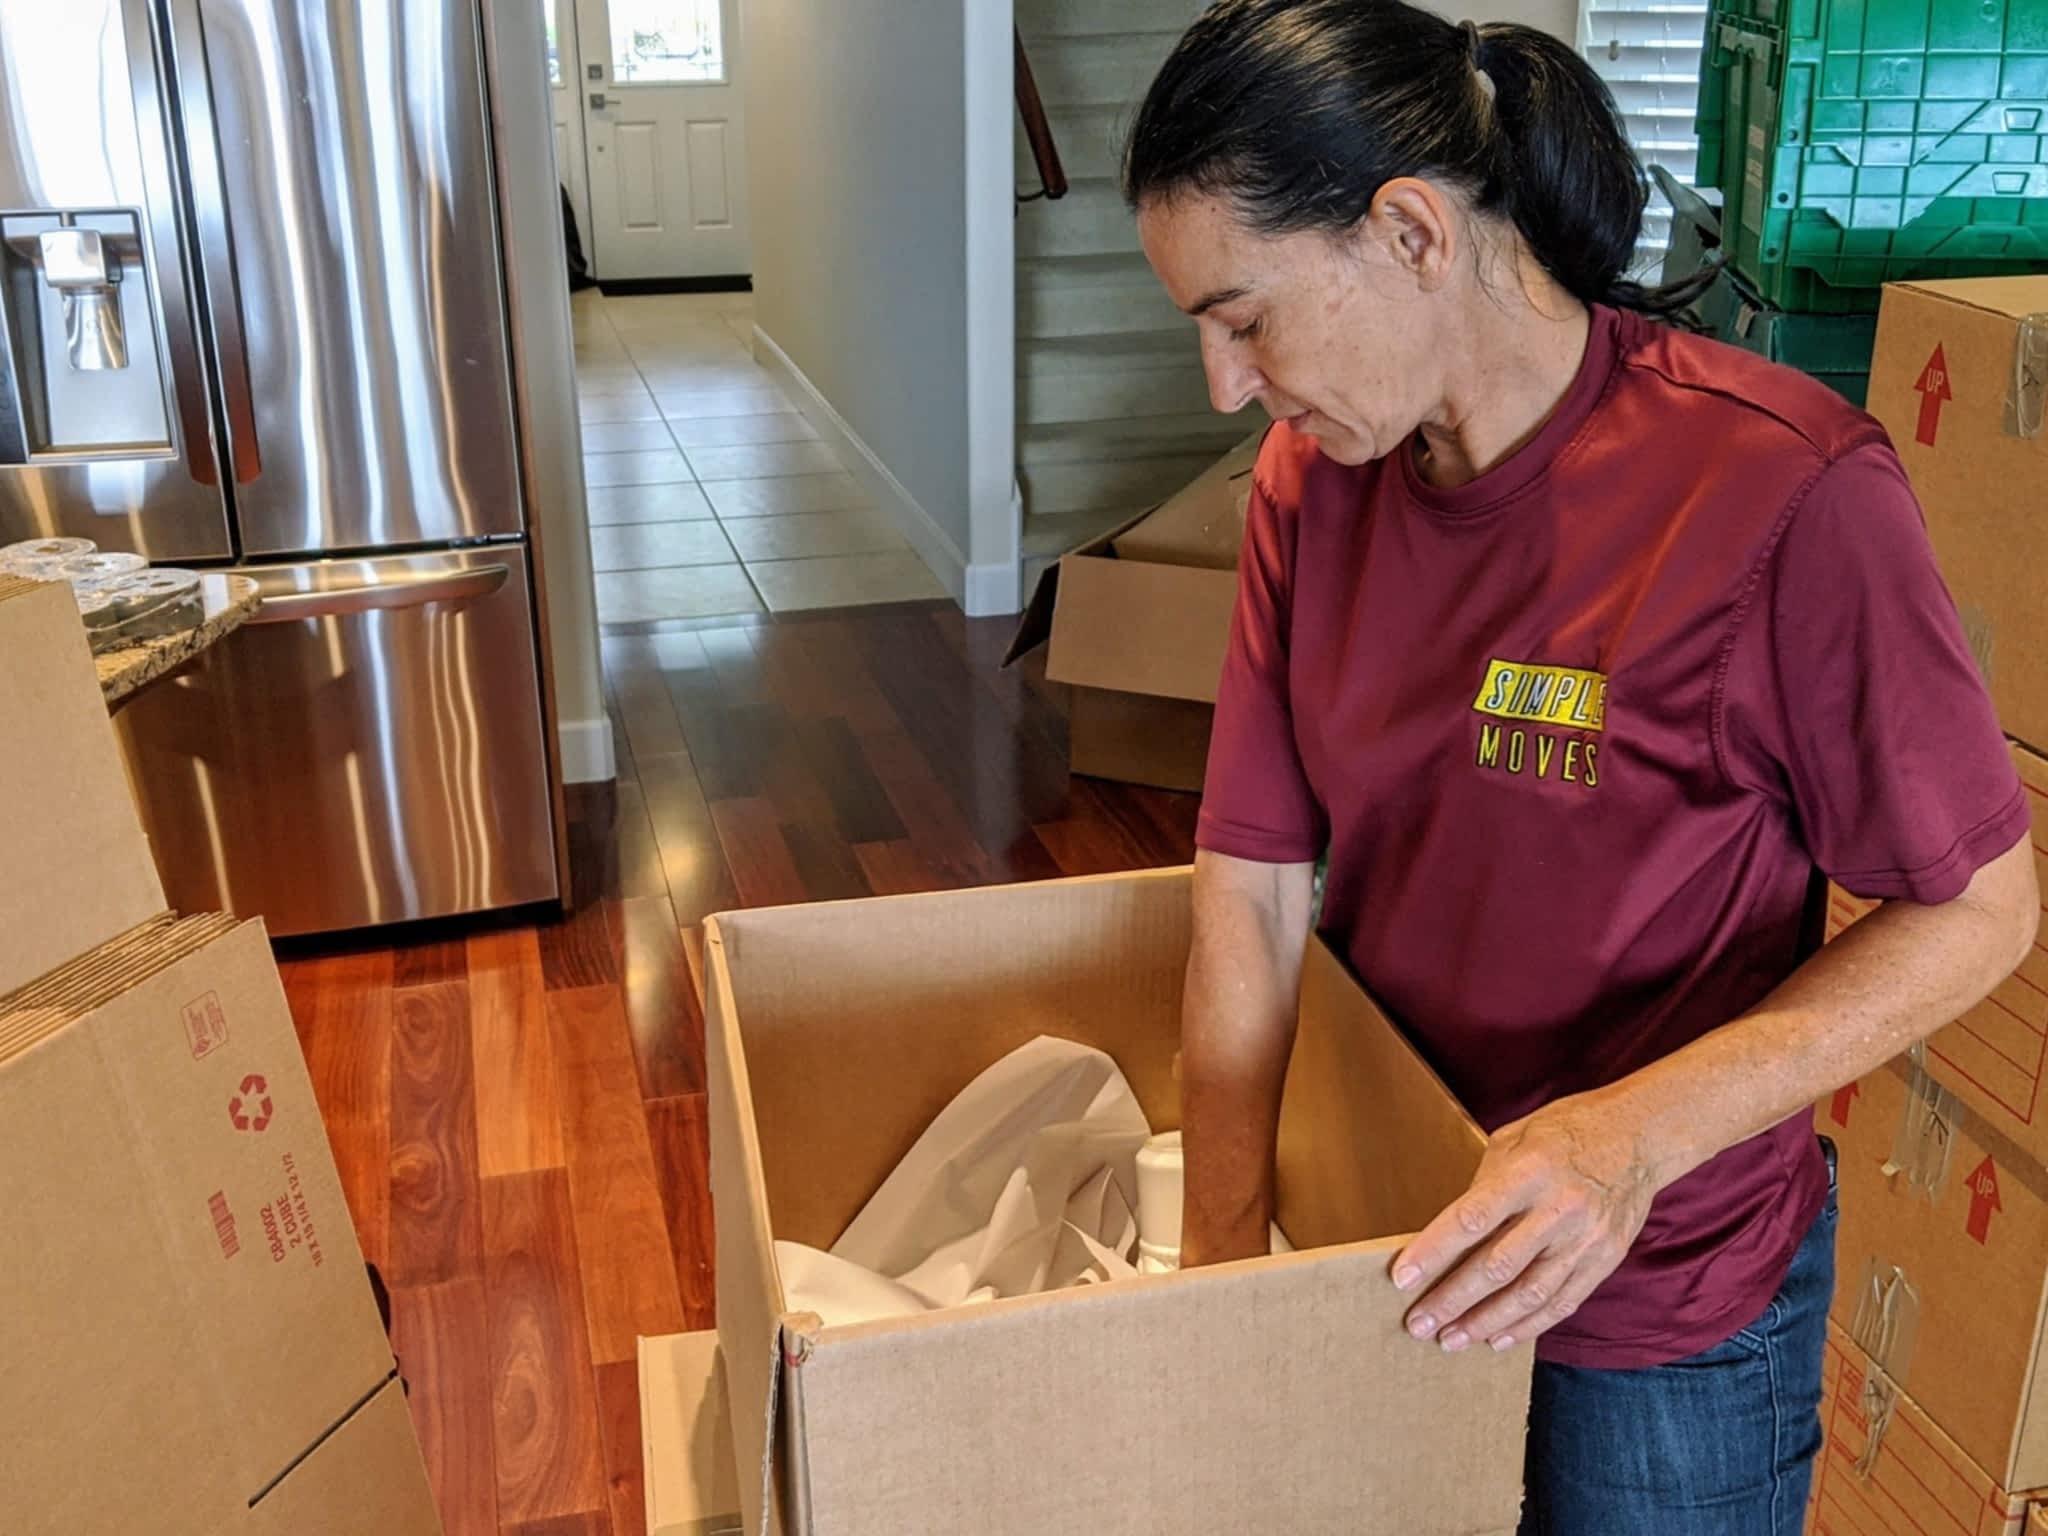 photo Simple Moves & Storage Movers Vancouver